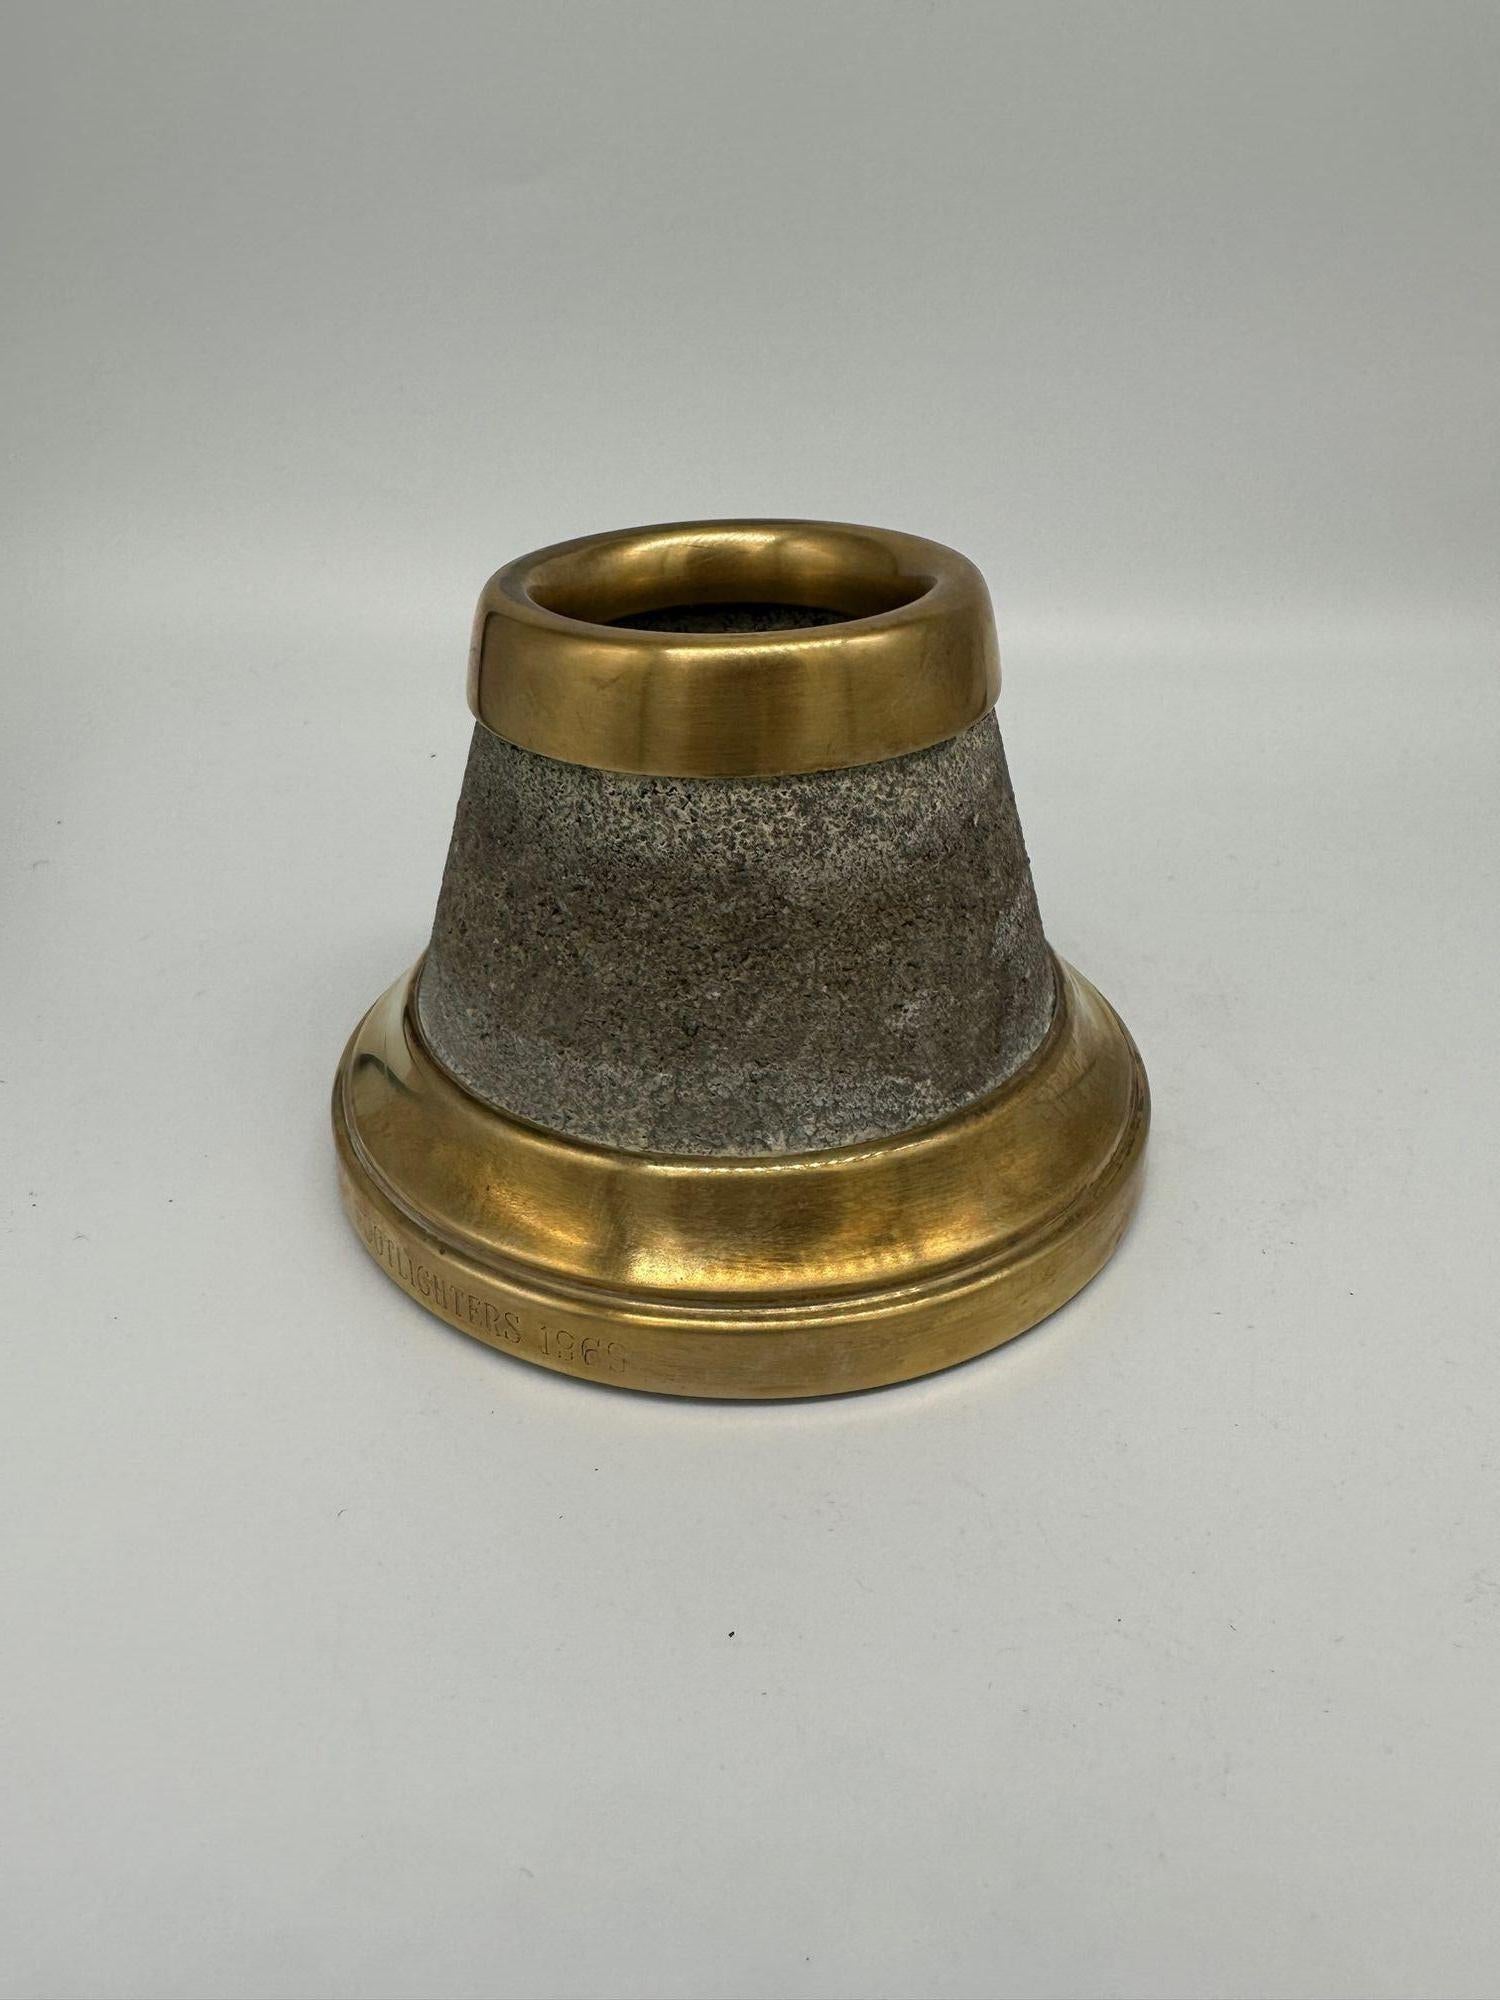 This Stone and Brass Match Holder and Striker, signed 